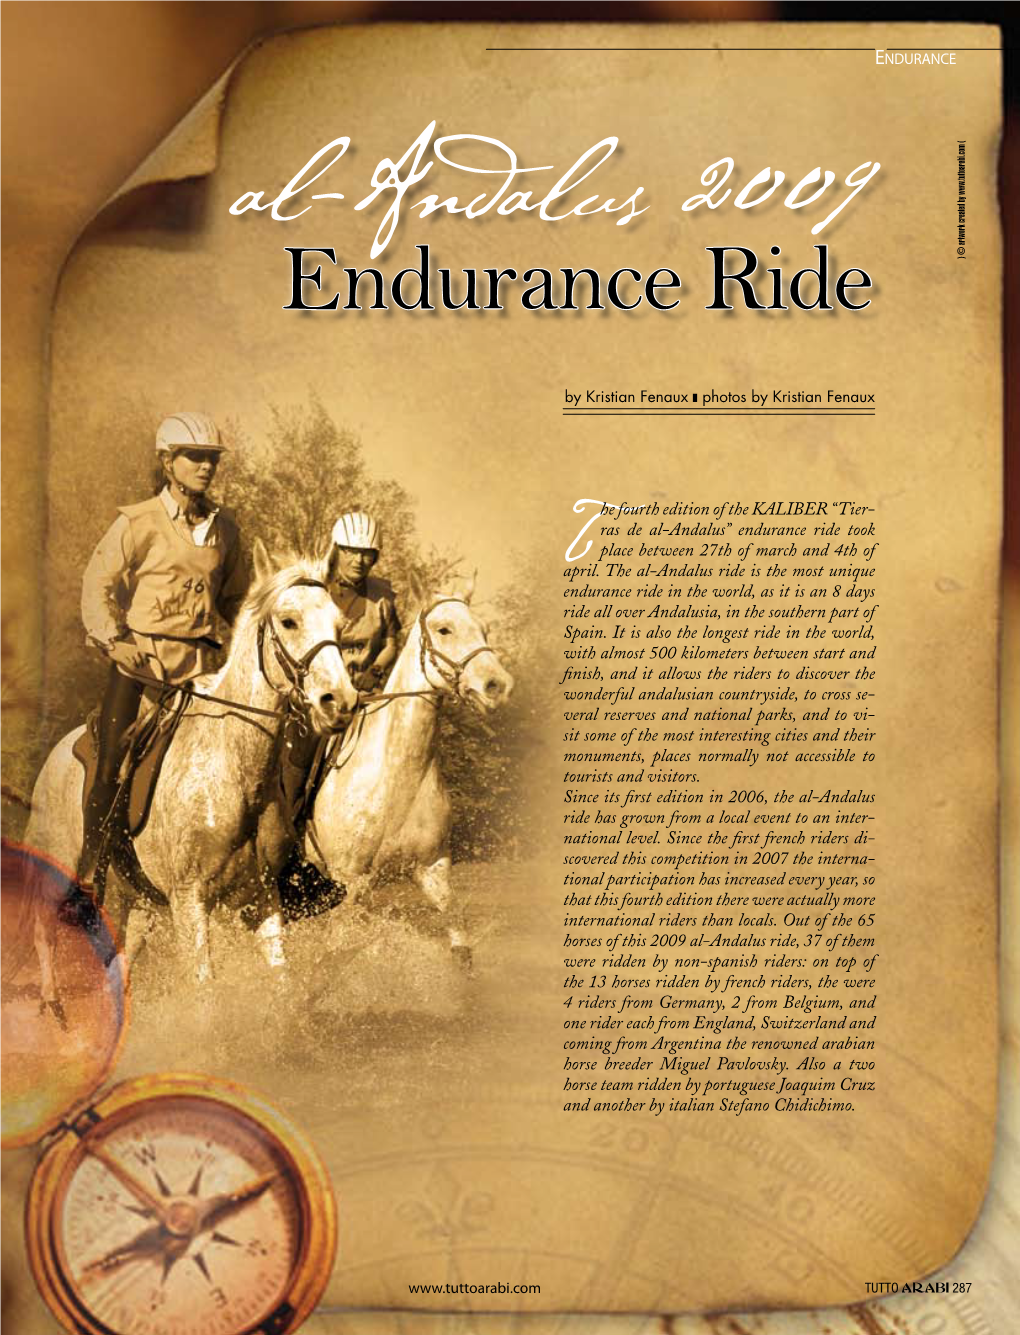 Endurance Ride Took Place Between 27Th of March and 4Th of April